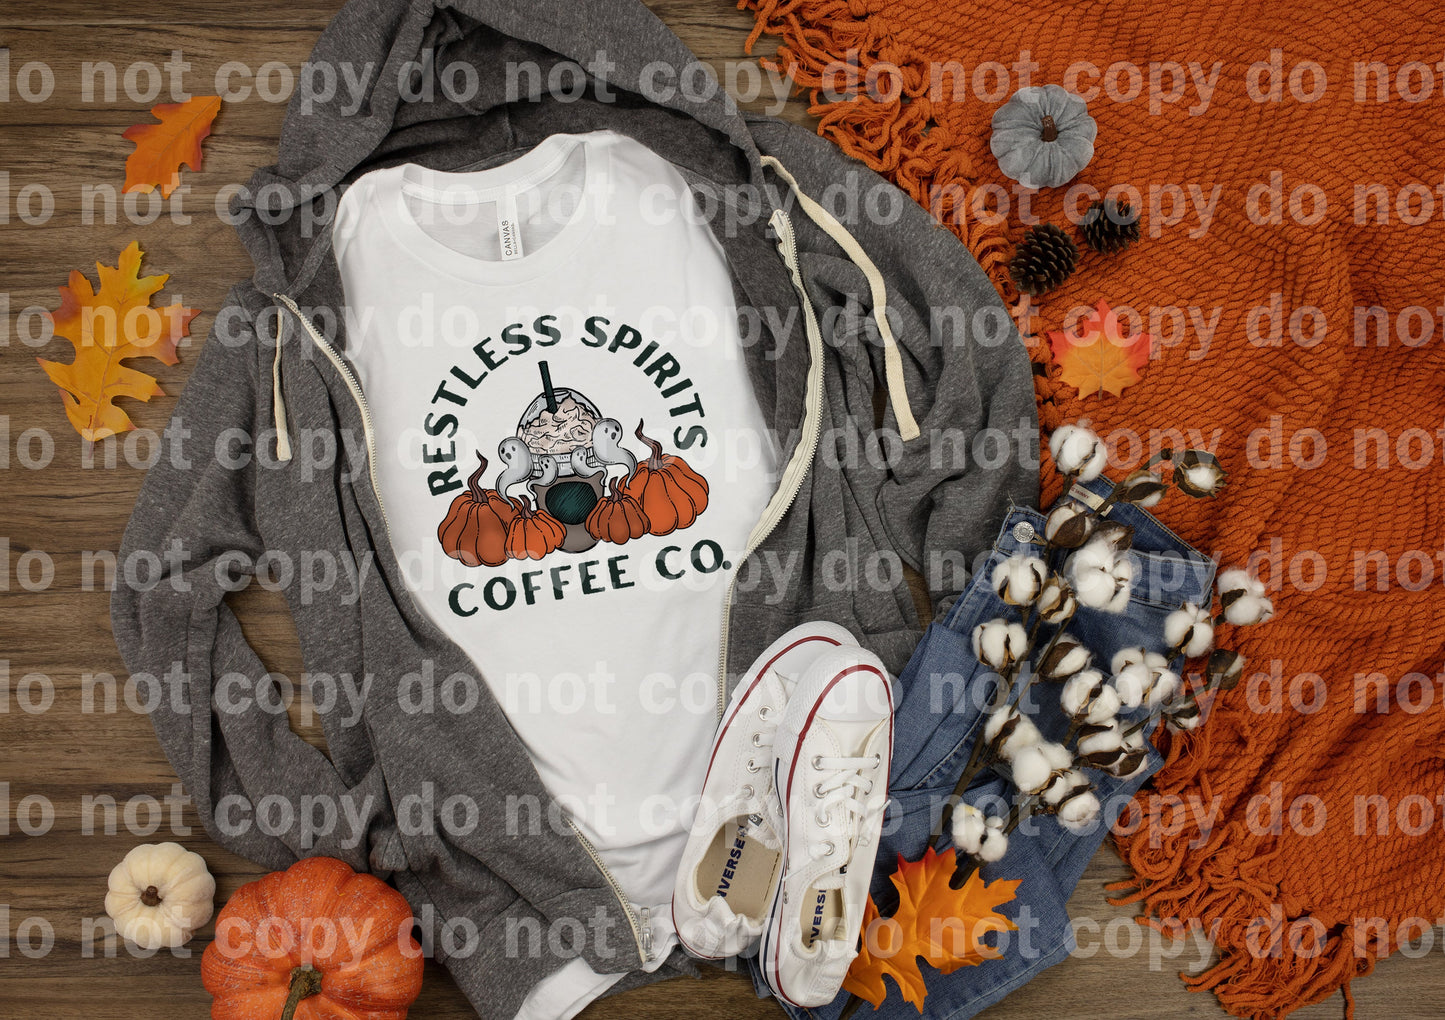 Restless Spirits Coffee Co. Dream Print or Sublimation Print